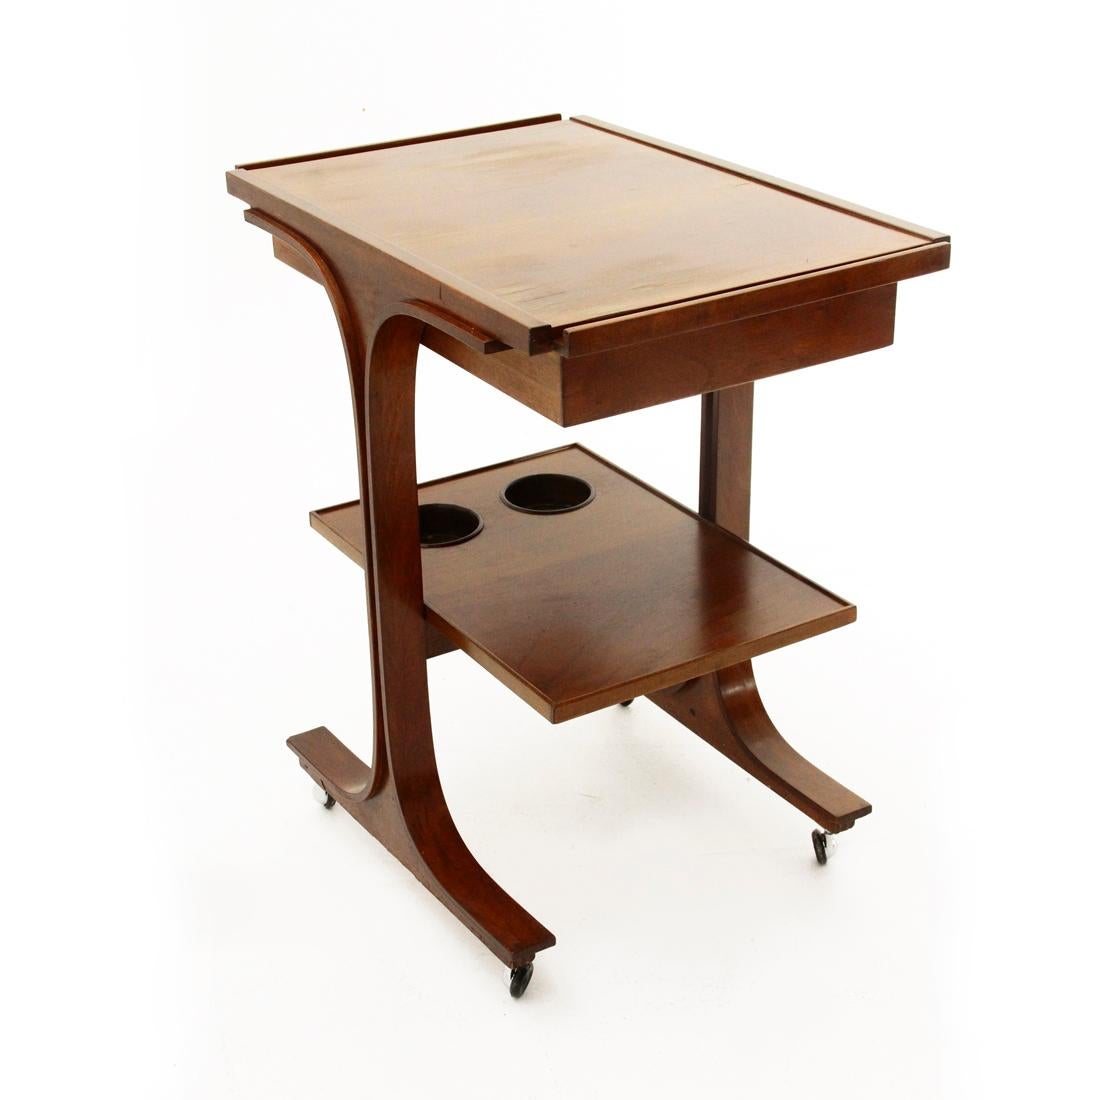 Mid-20th Century Plywood Cart by Gianfranco Frattini for Bernini, 1960s For Sale